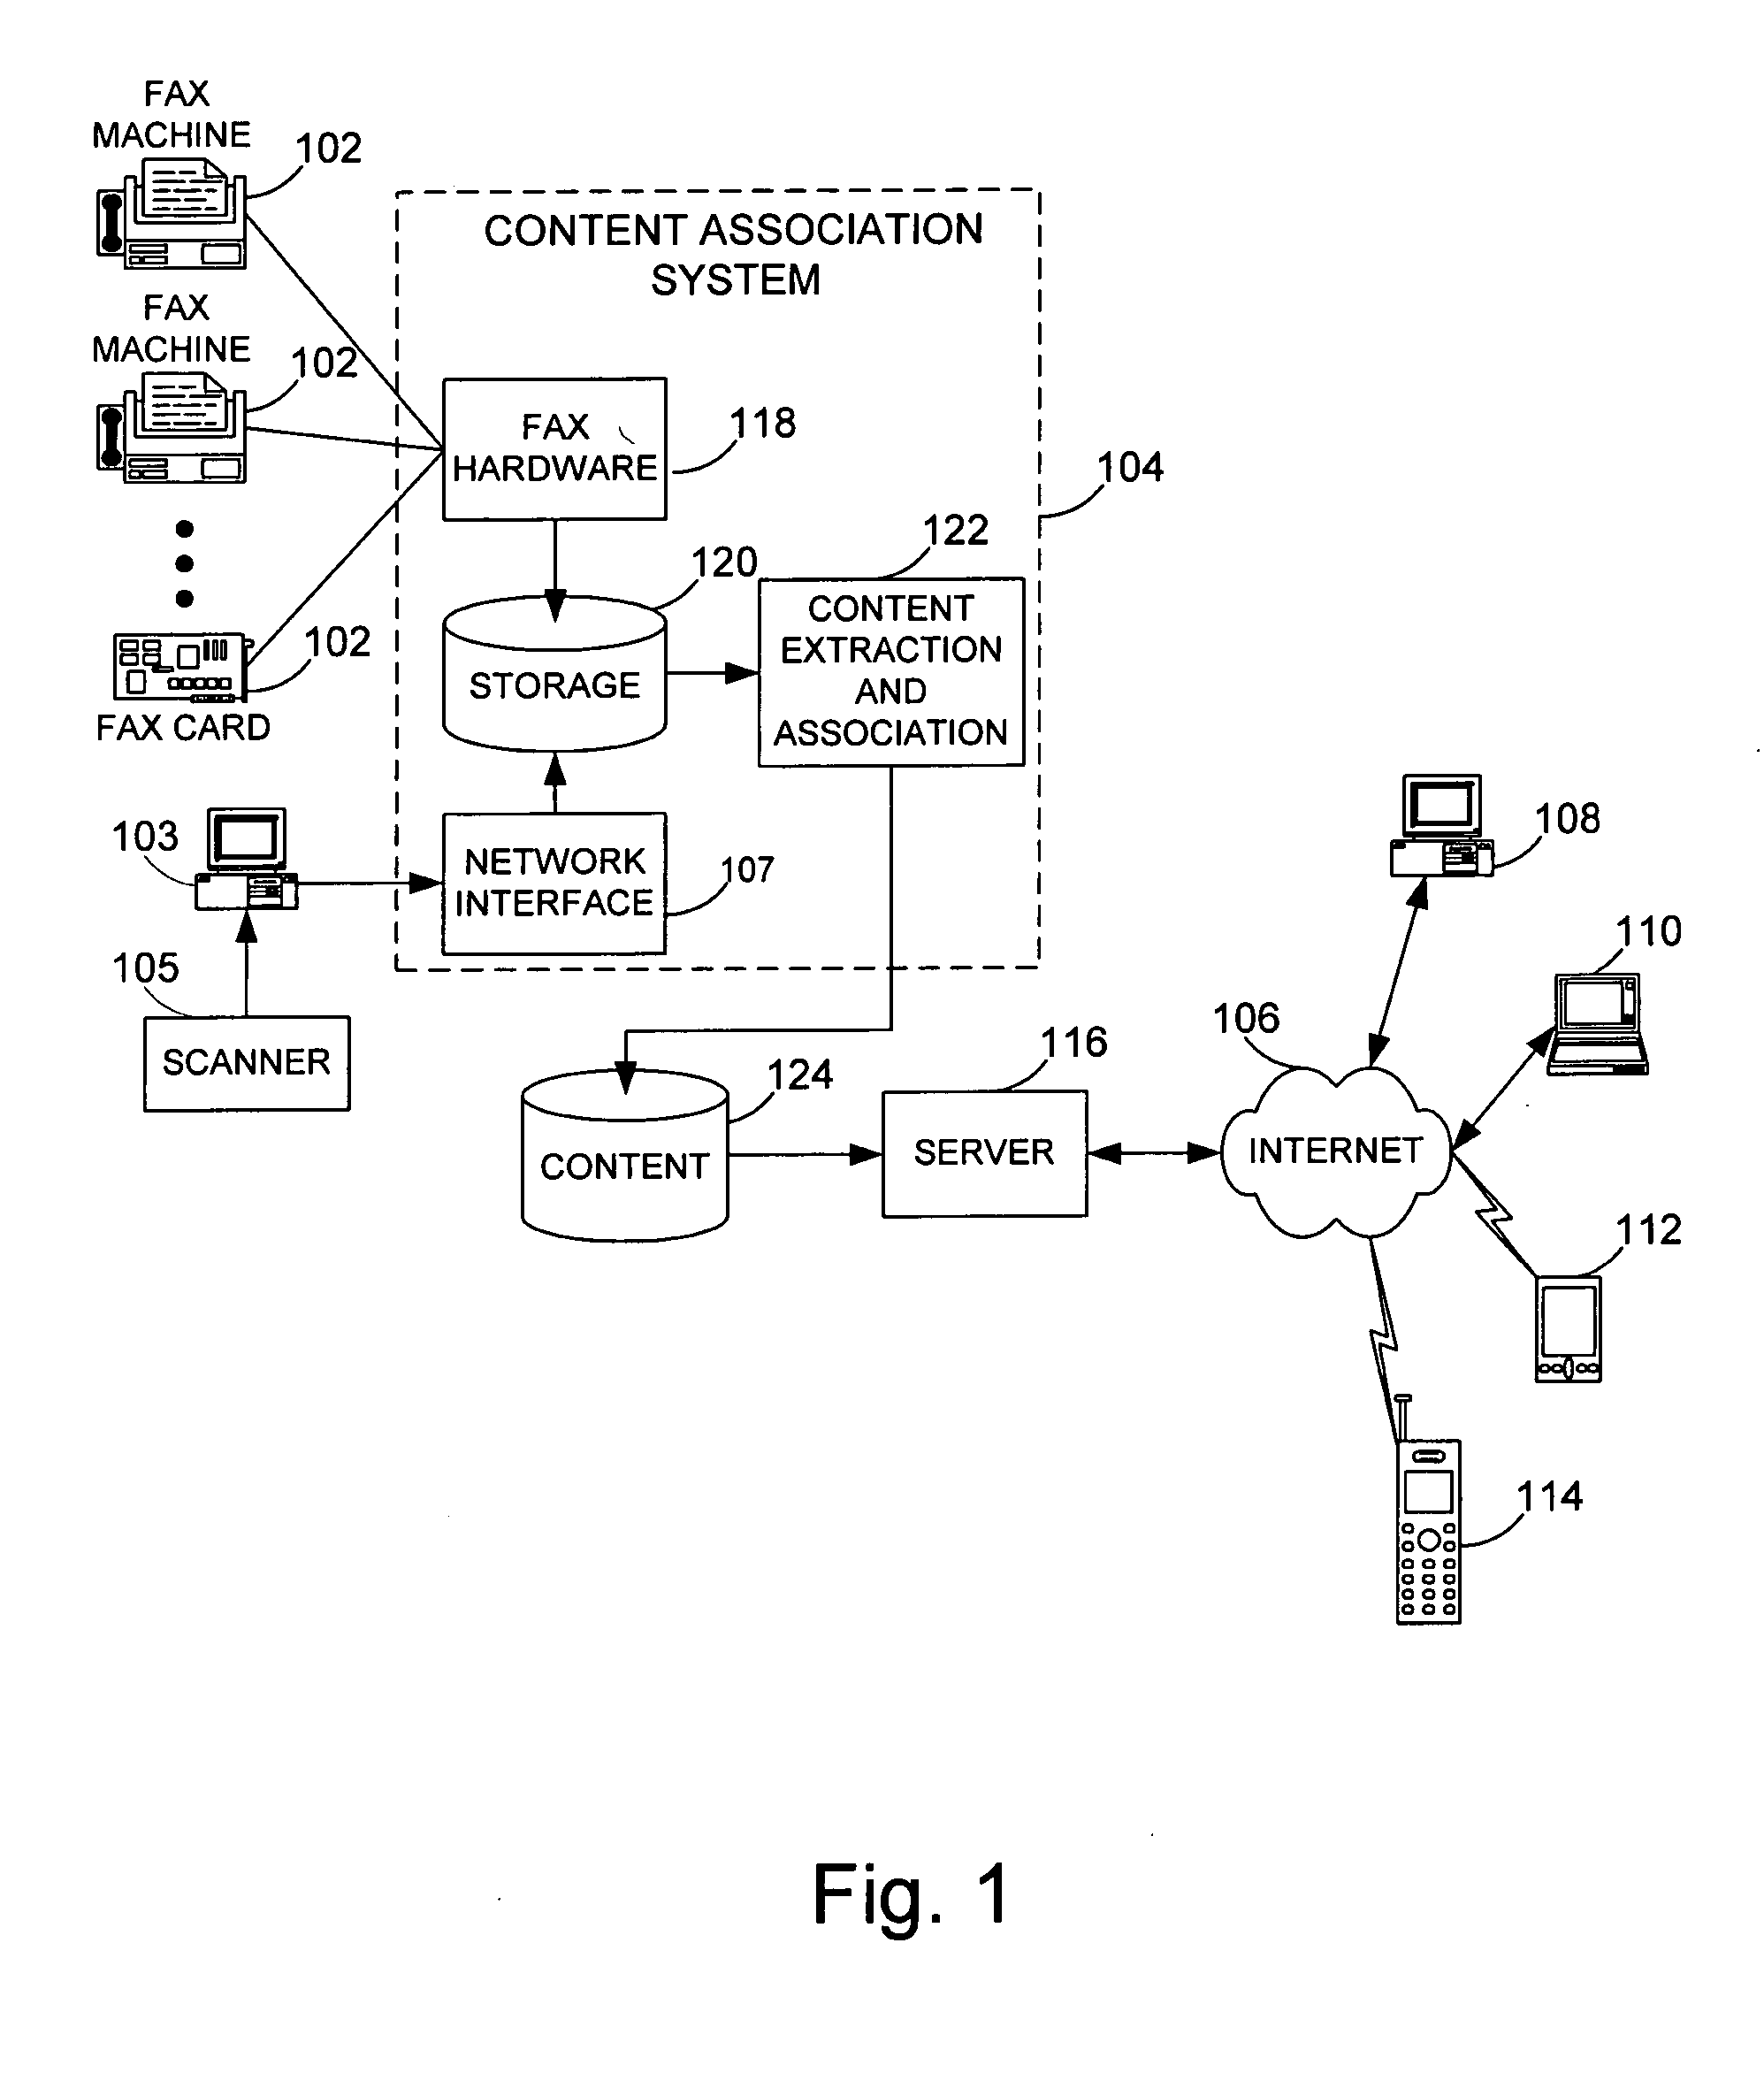 Systems and methods for the dissemination of content by a network using a facsimile machine